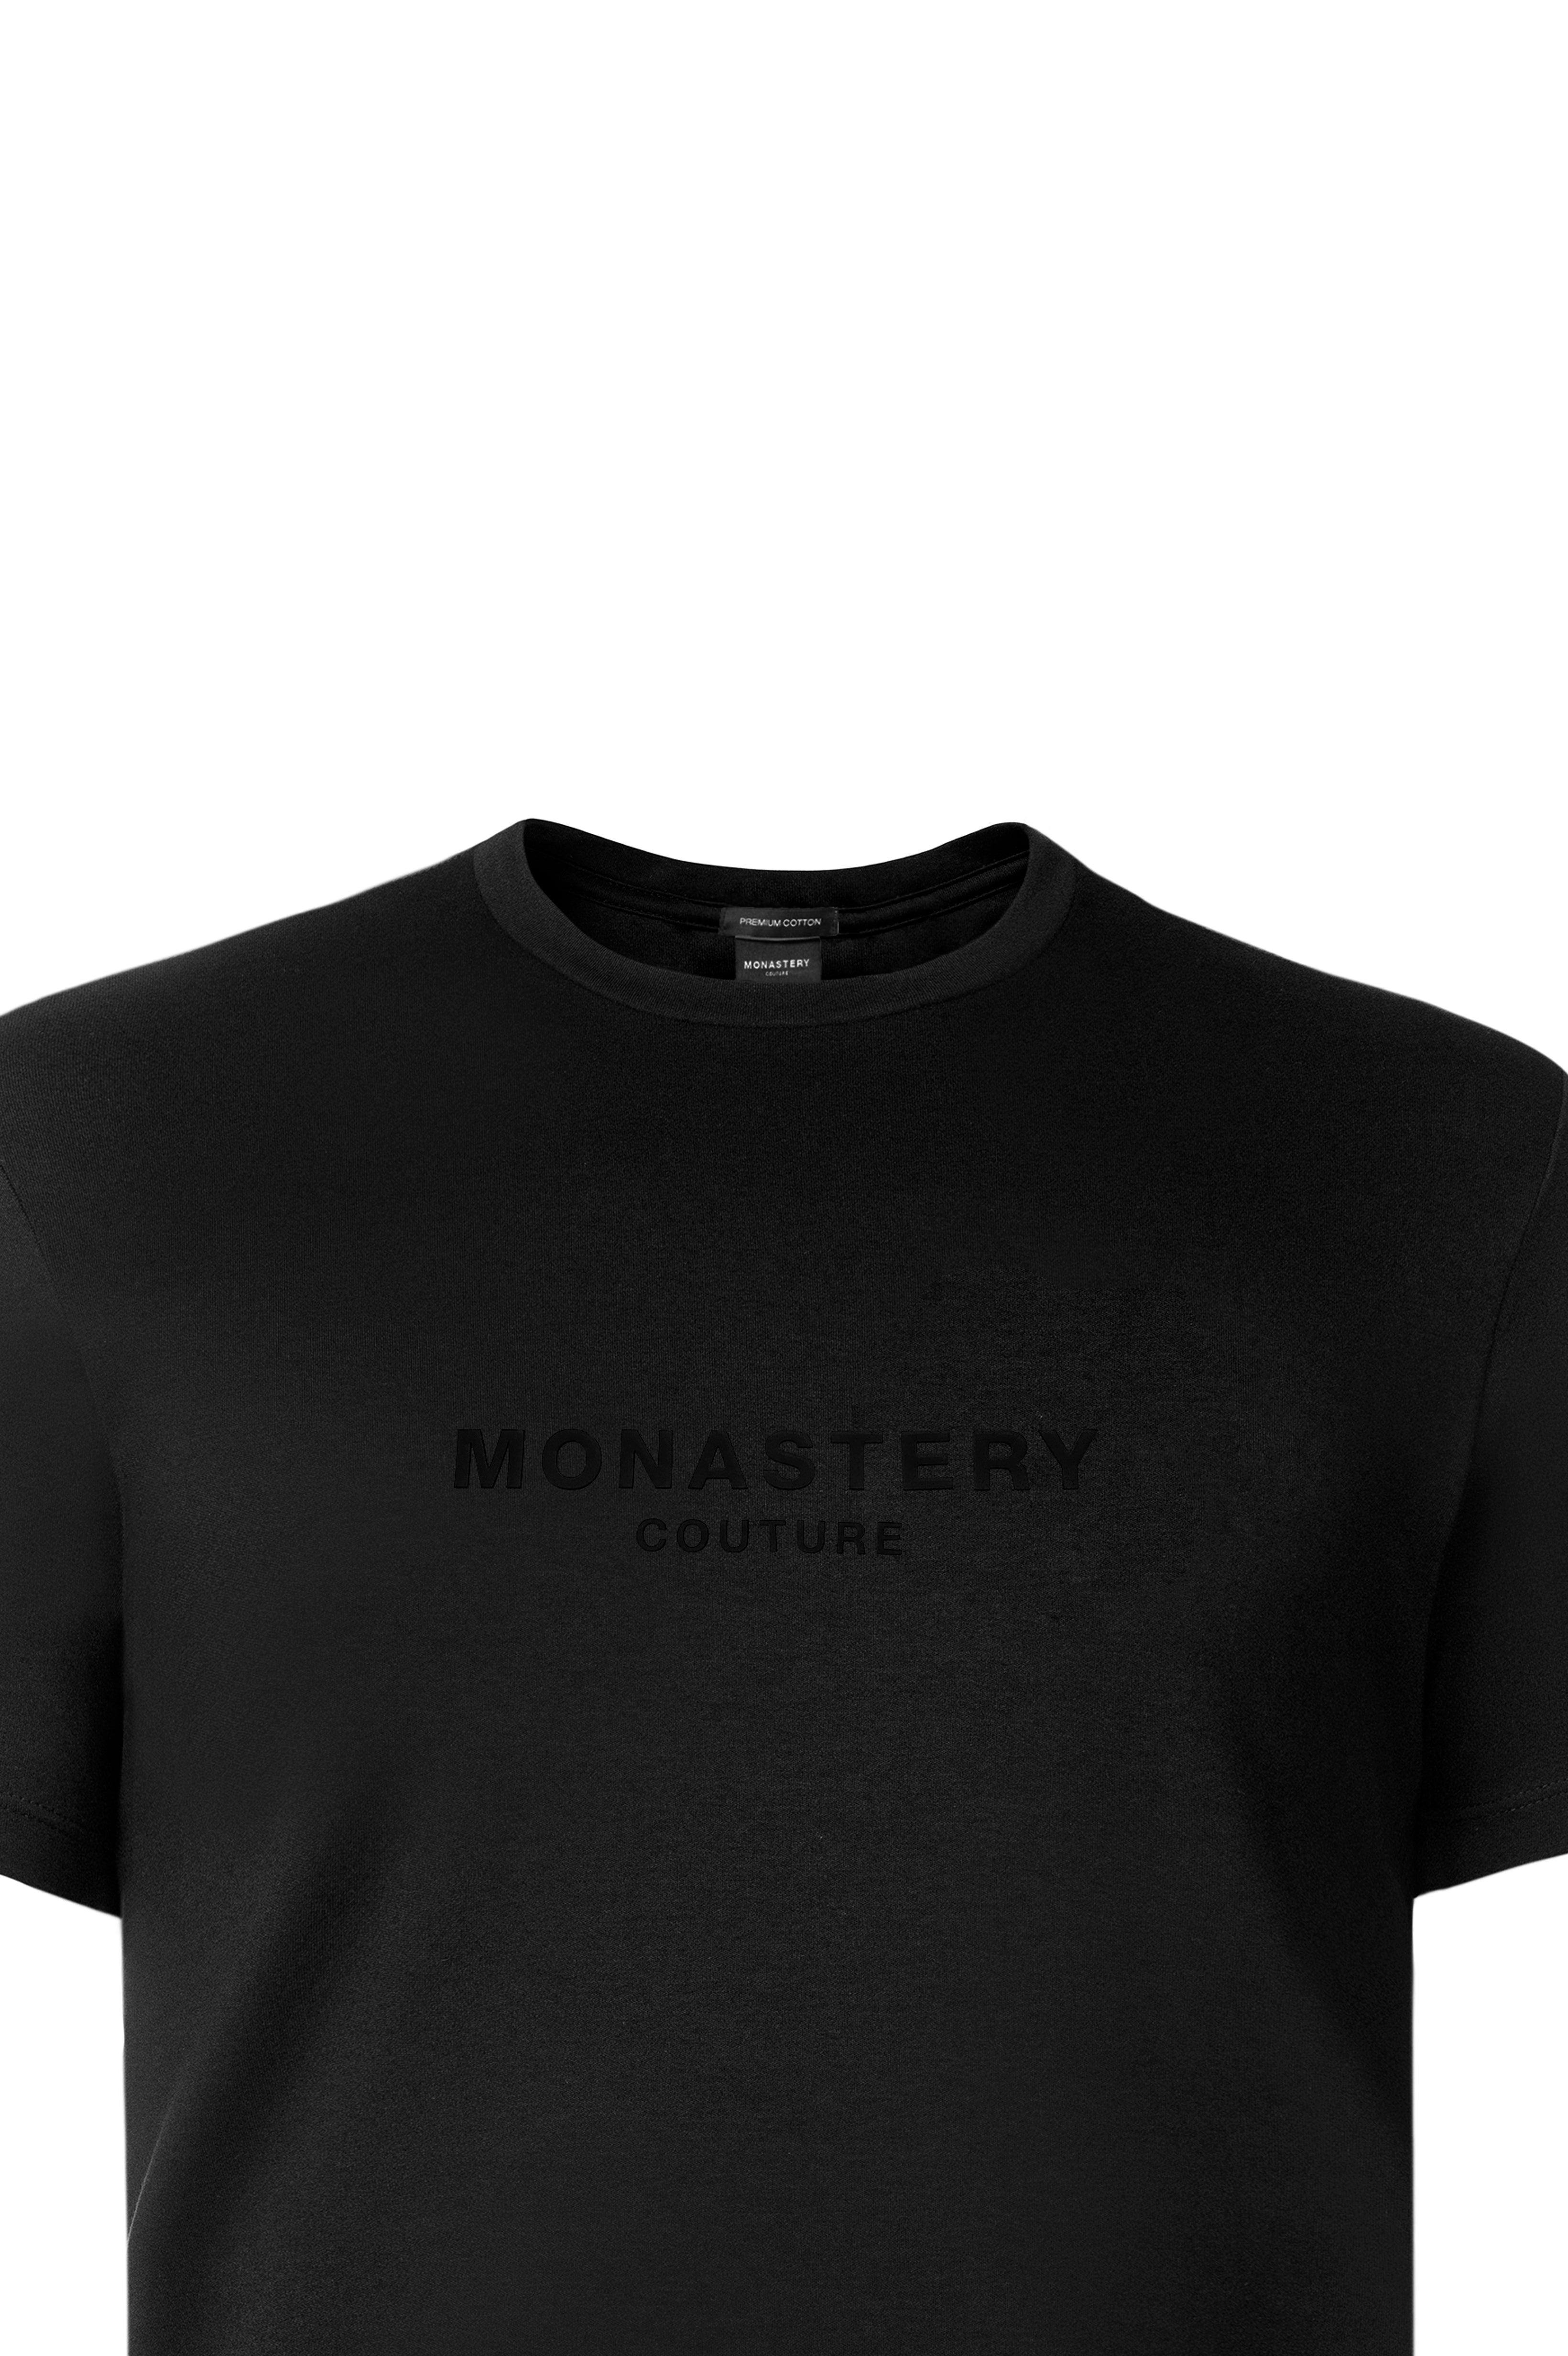 OLIYMPUS T-SHIRT BLACK | Monastery Couture